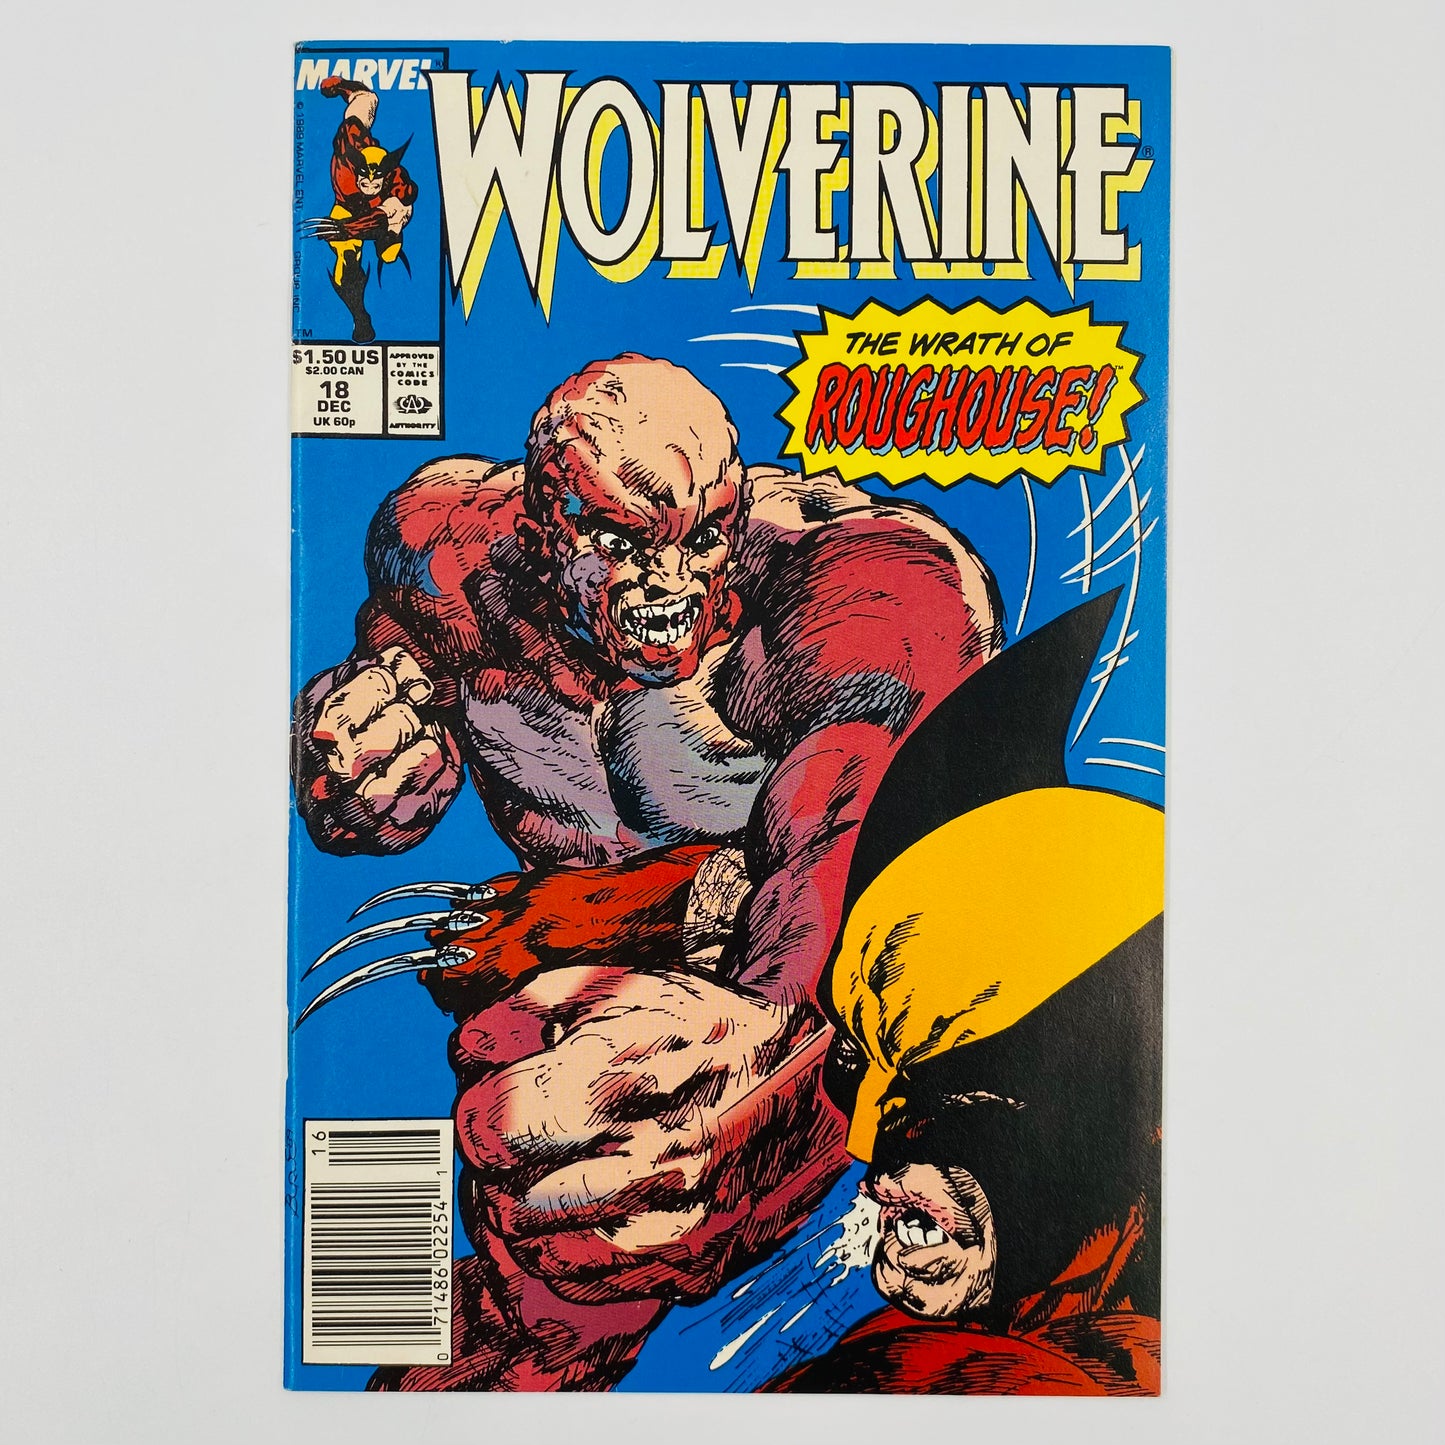 Wolverine #17-23 Acts of Vengeance (1989-1990) Marvel